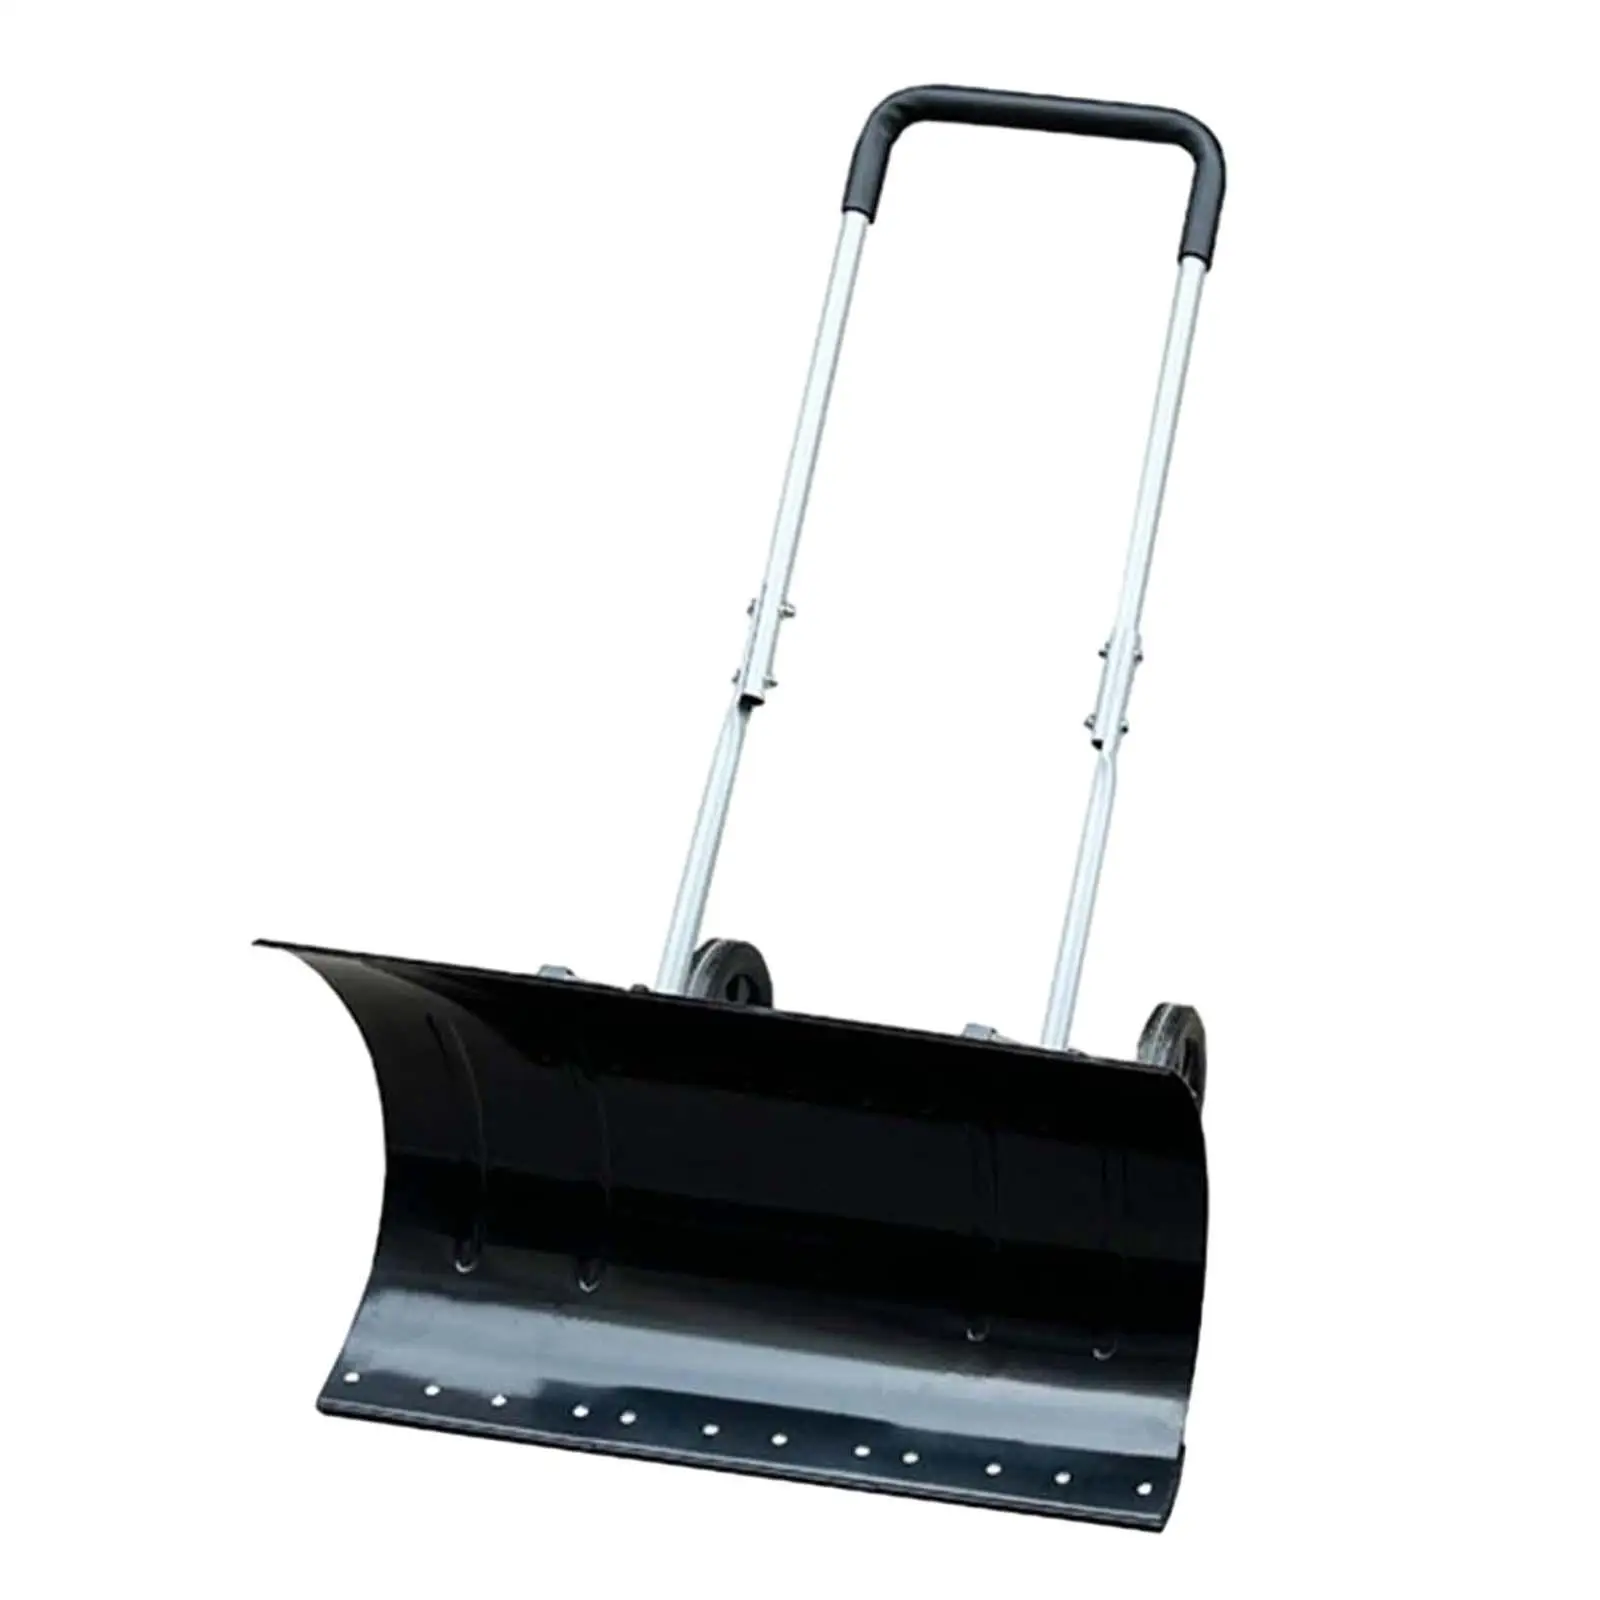 Snow Shovel Snow Puller Hand Pushed Durable Lightweight Snow Removal Tool for Pavement Doorway Sidewalk Deck Backyard